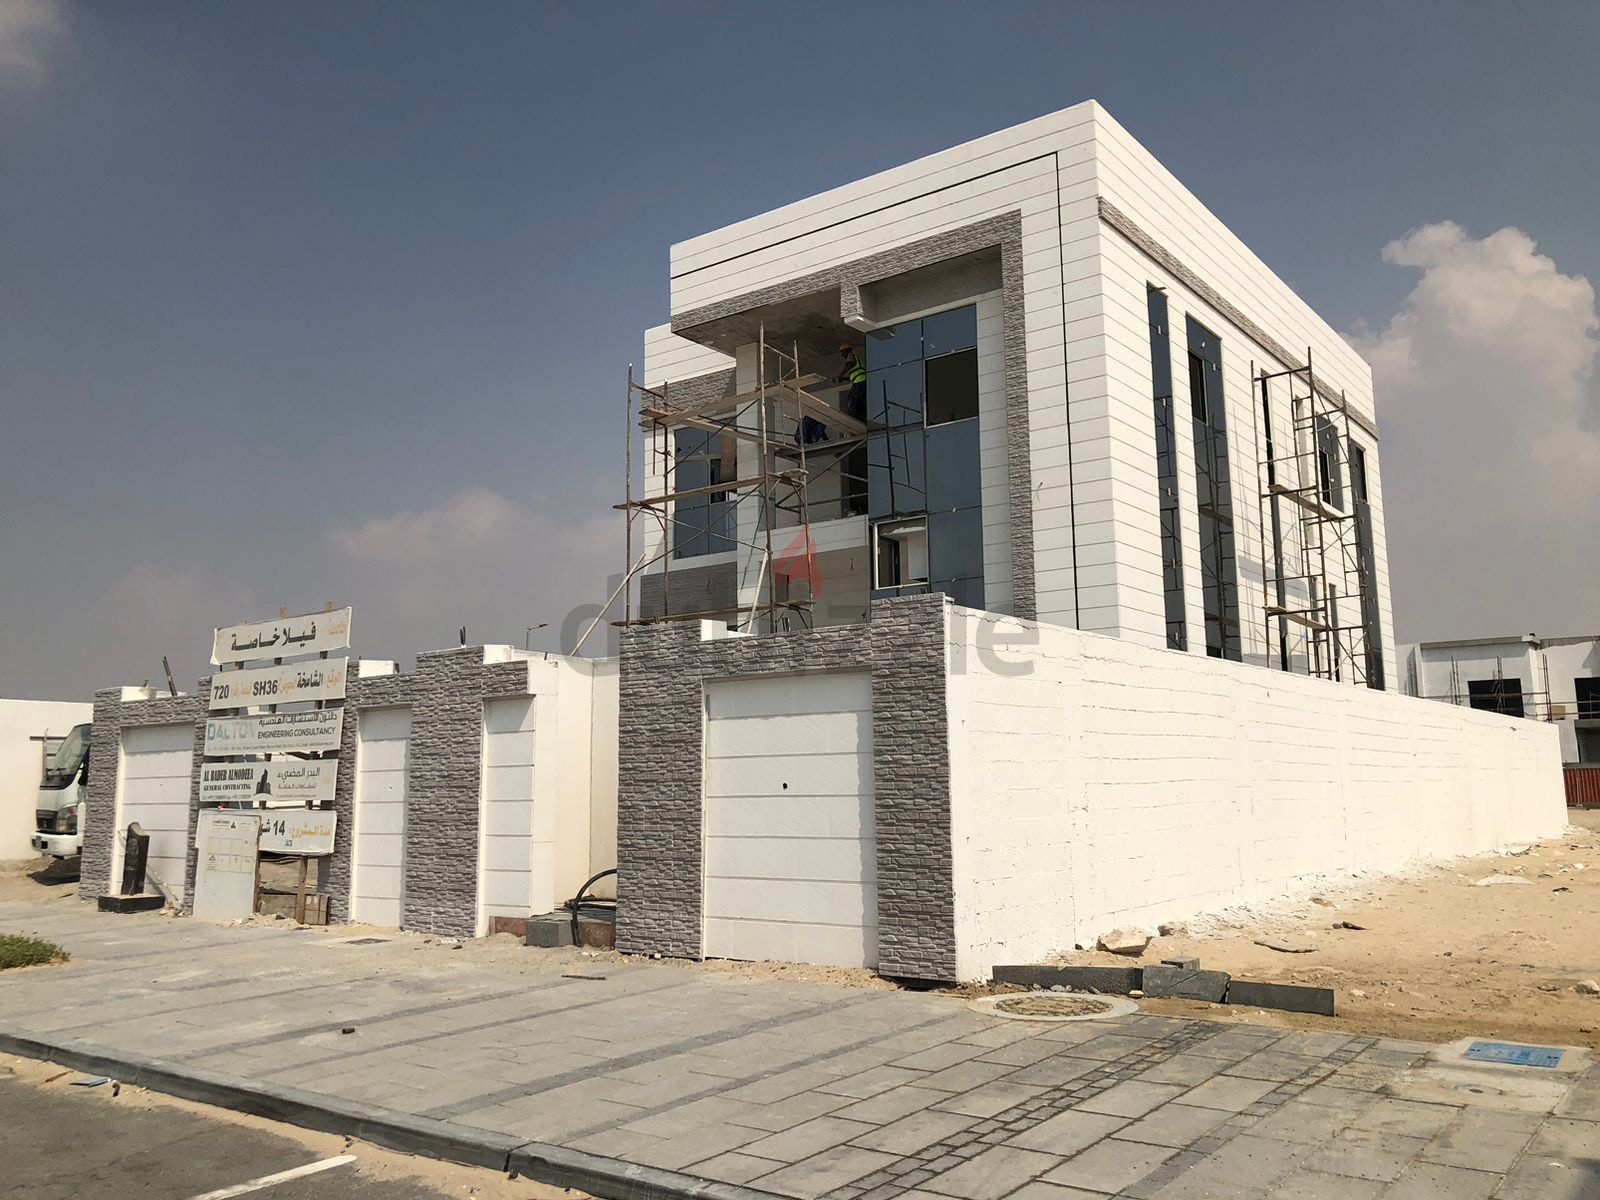 For Sale, A Residential Villa In Al-shamkha Al-riman 1, With High-end Finishes